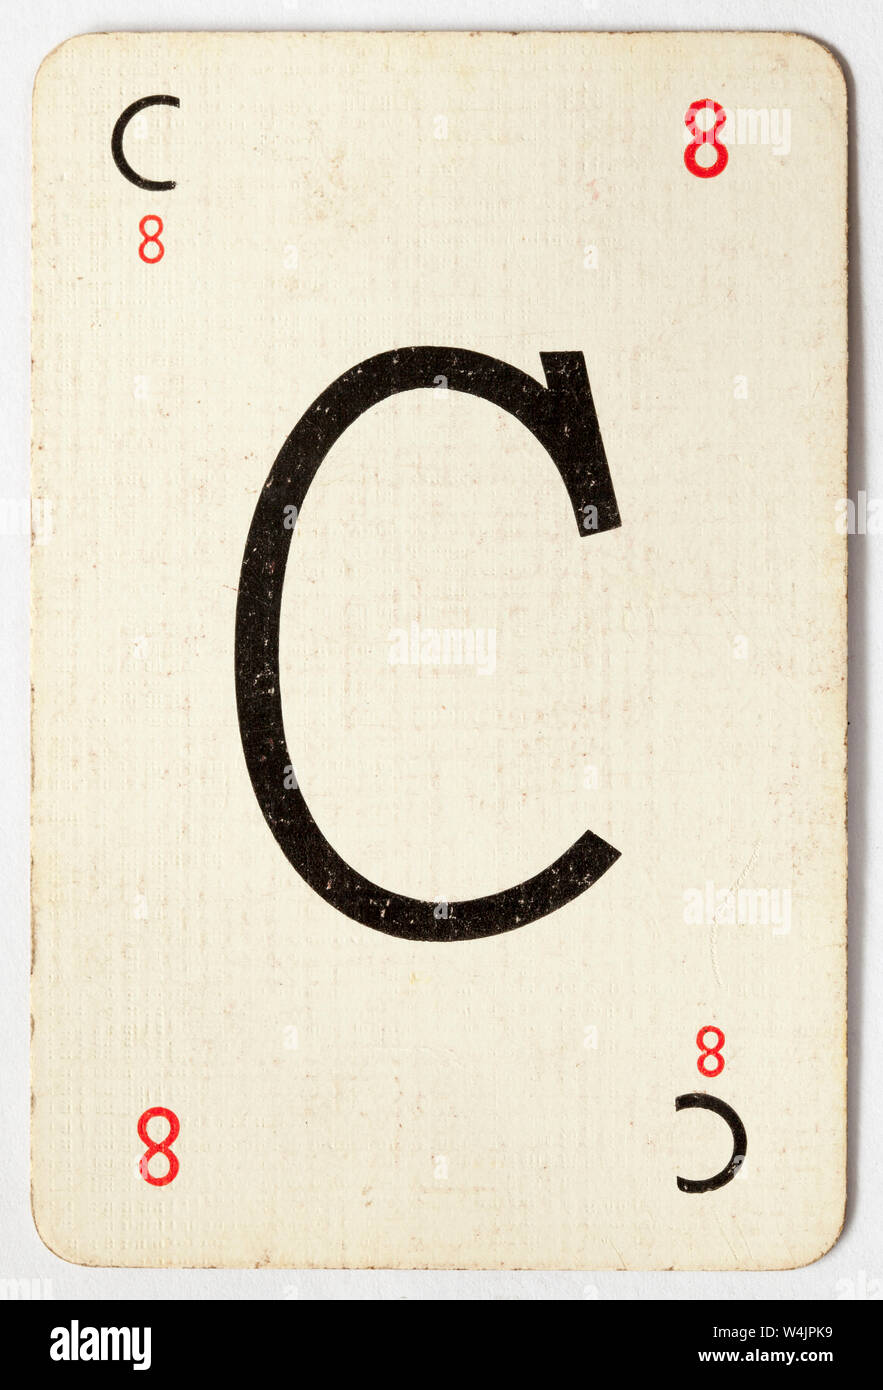 Vintage Playing Card Letter  from Lexicon Card Game Stock Photo